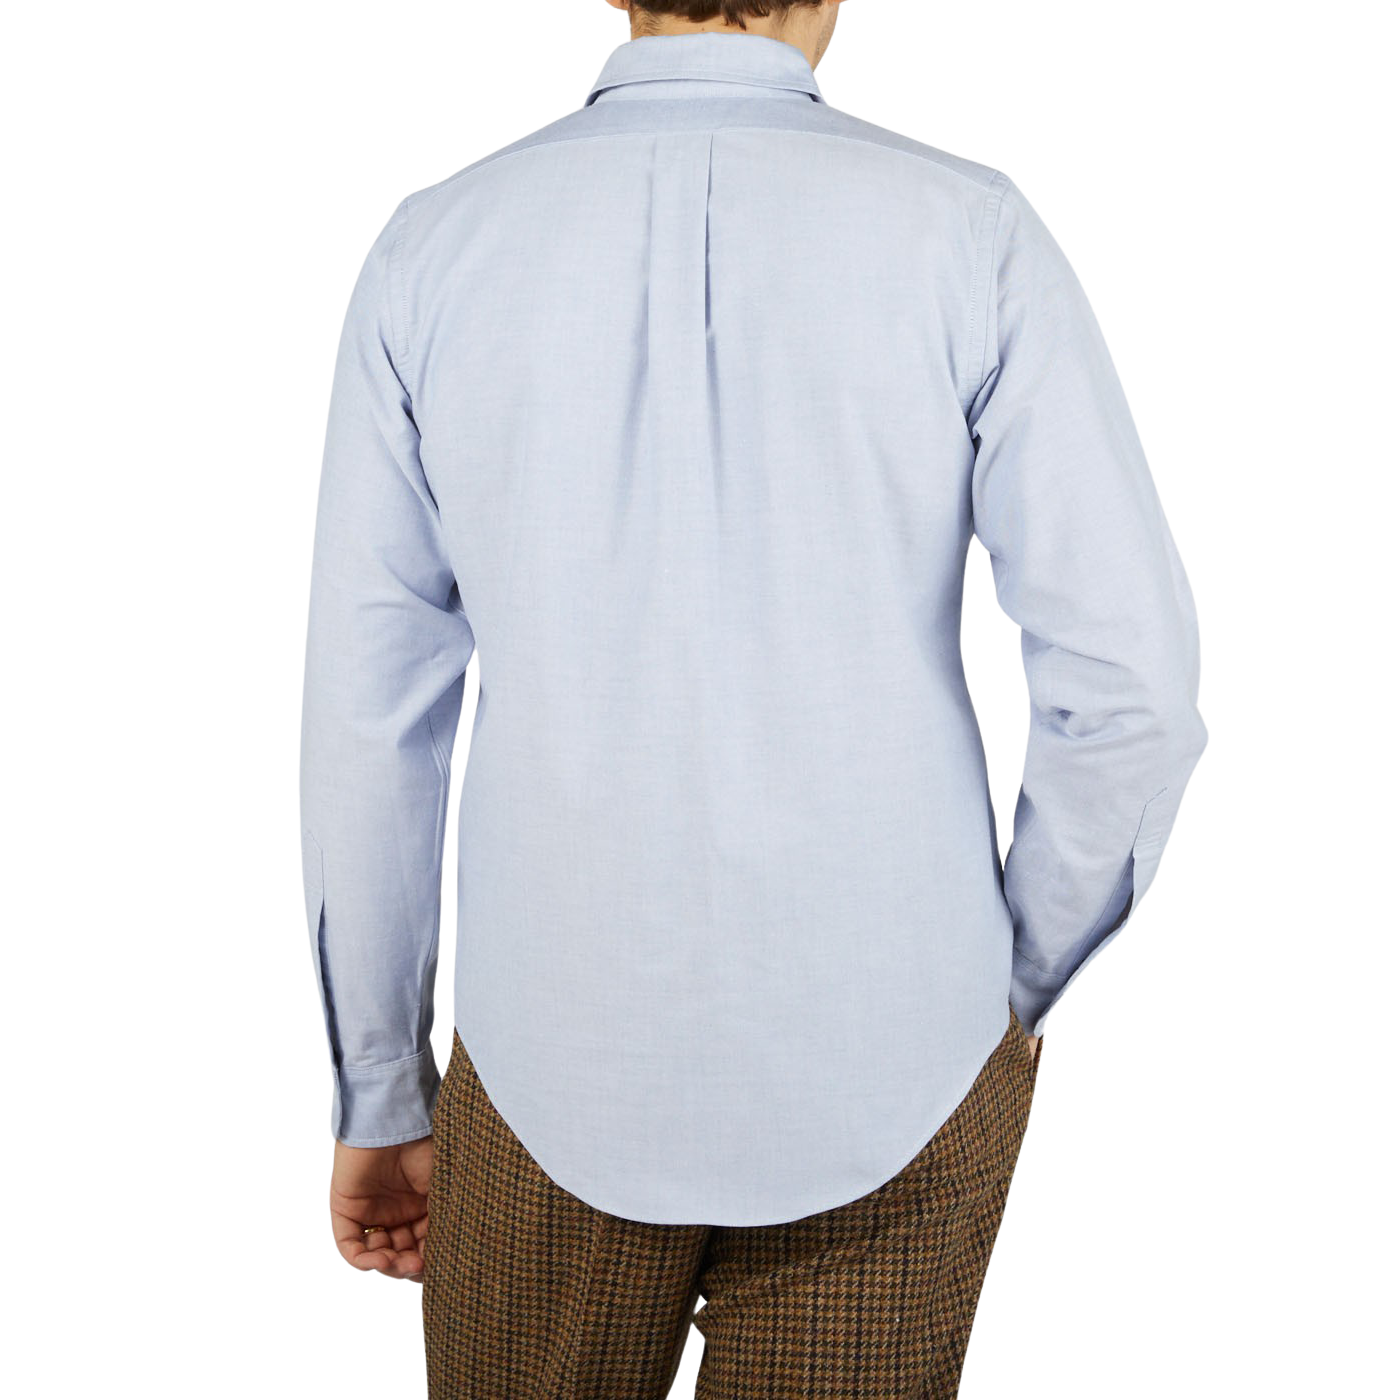 The back view of a man wearing a Far East Manufacturing Light Blue Cotton Oxford BD Regular Shirt and brown pants.